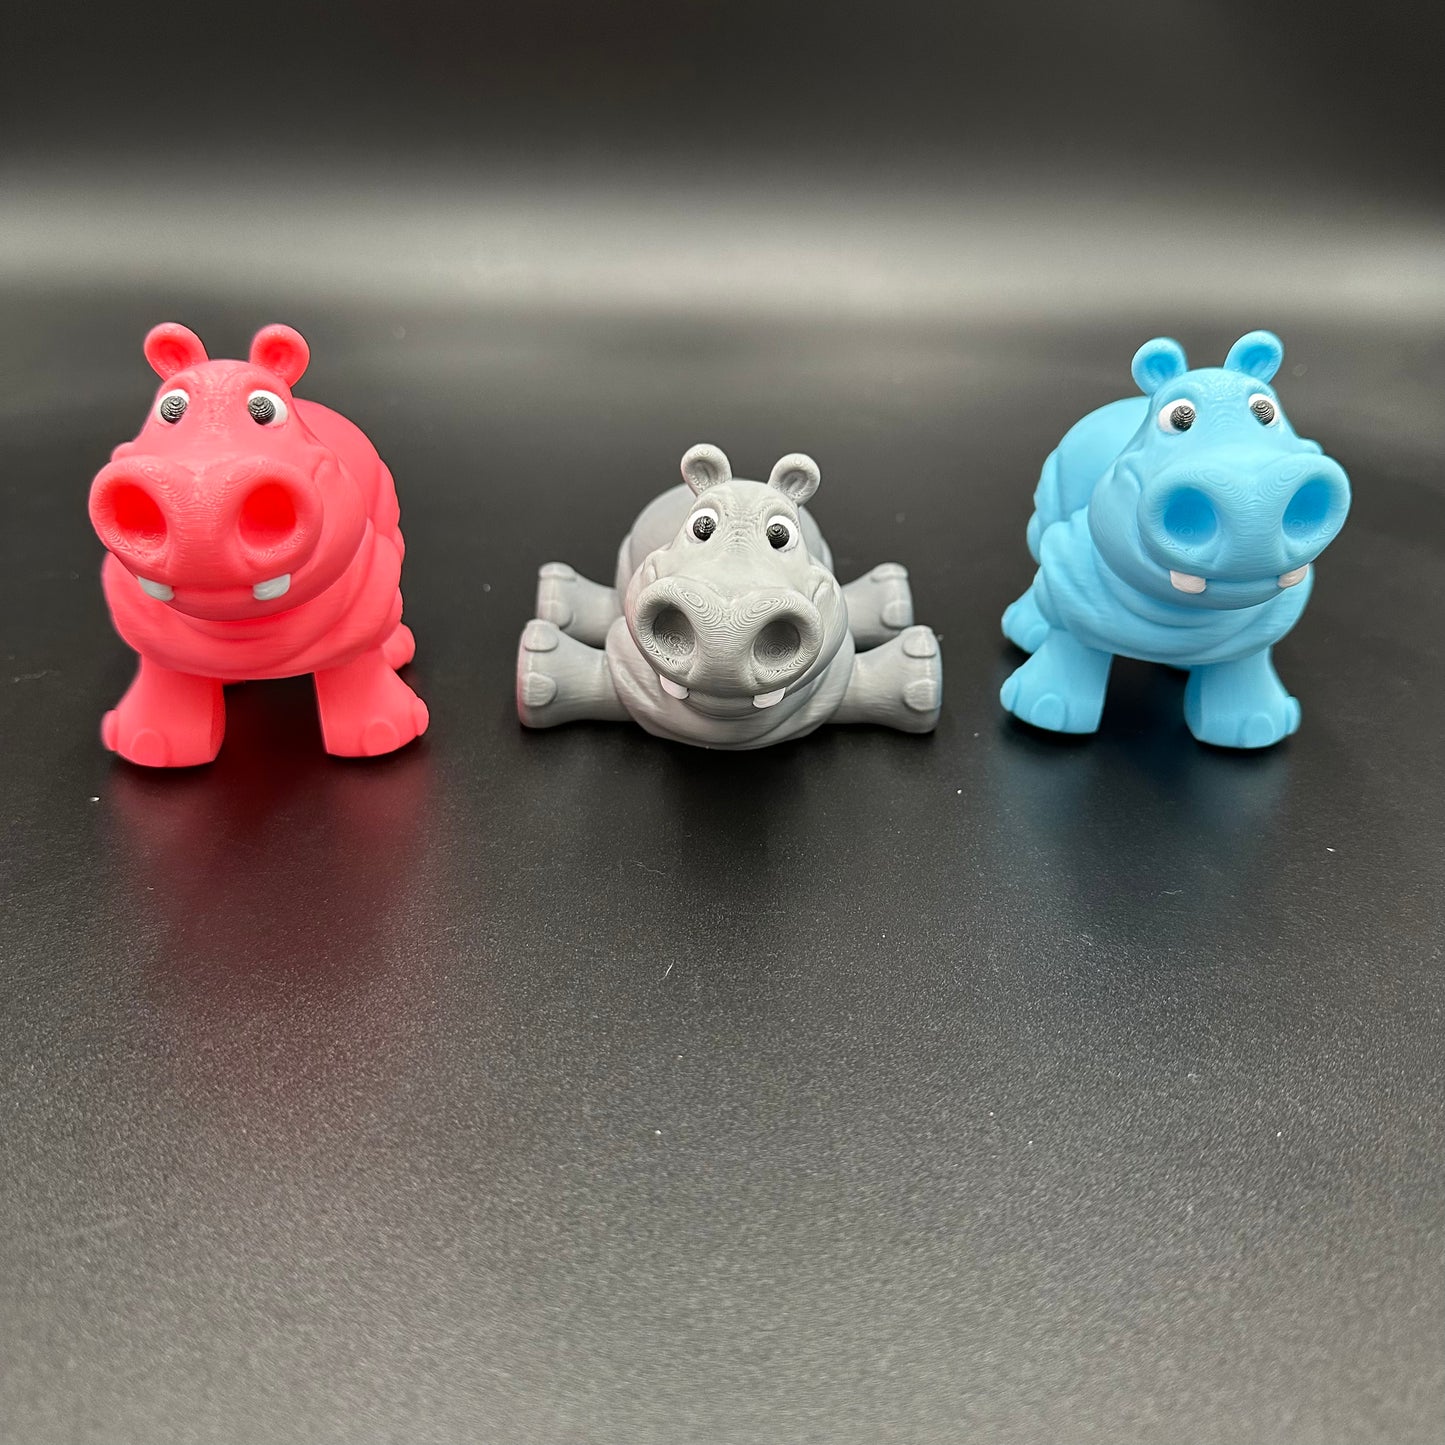 3D Printed Baby Hippo!